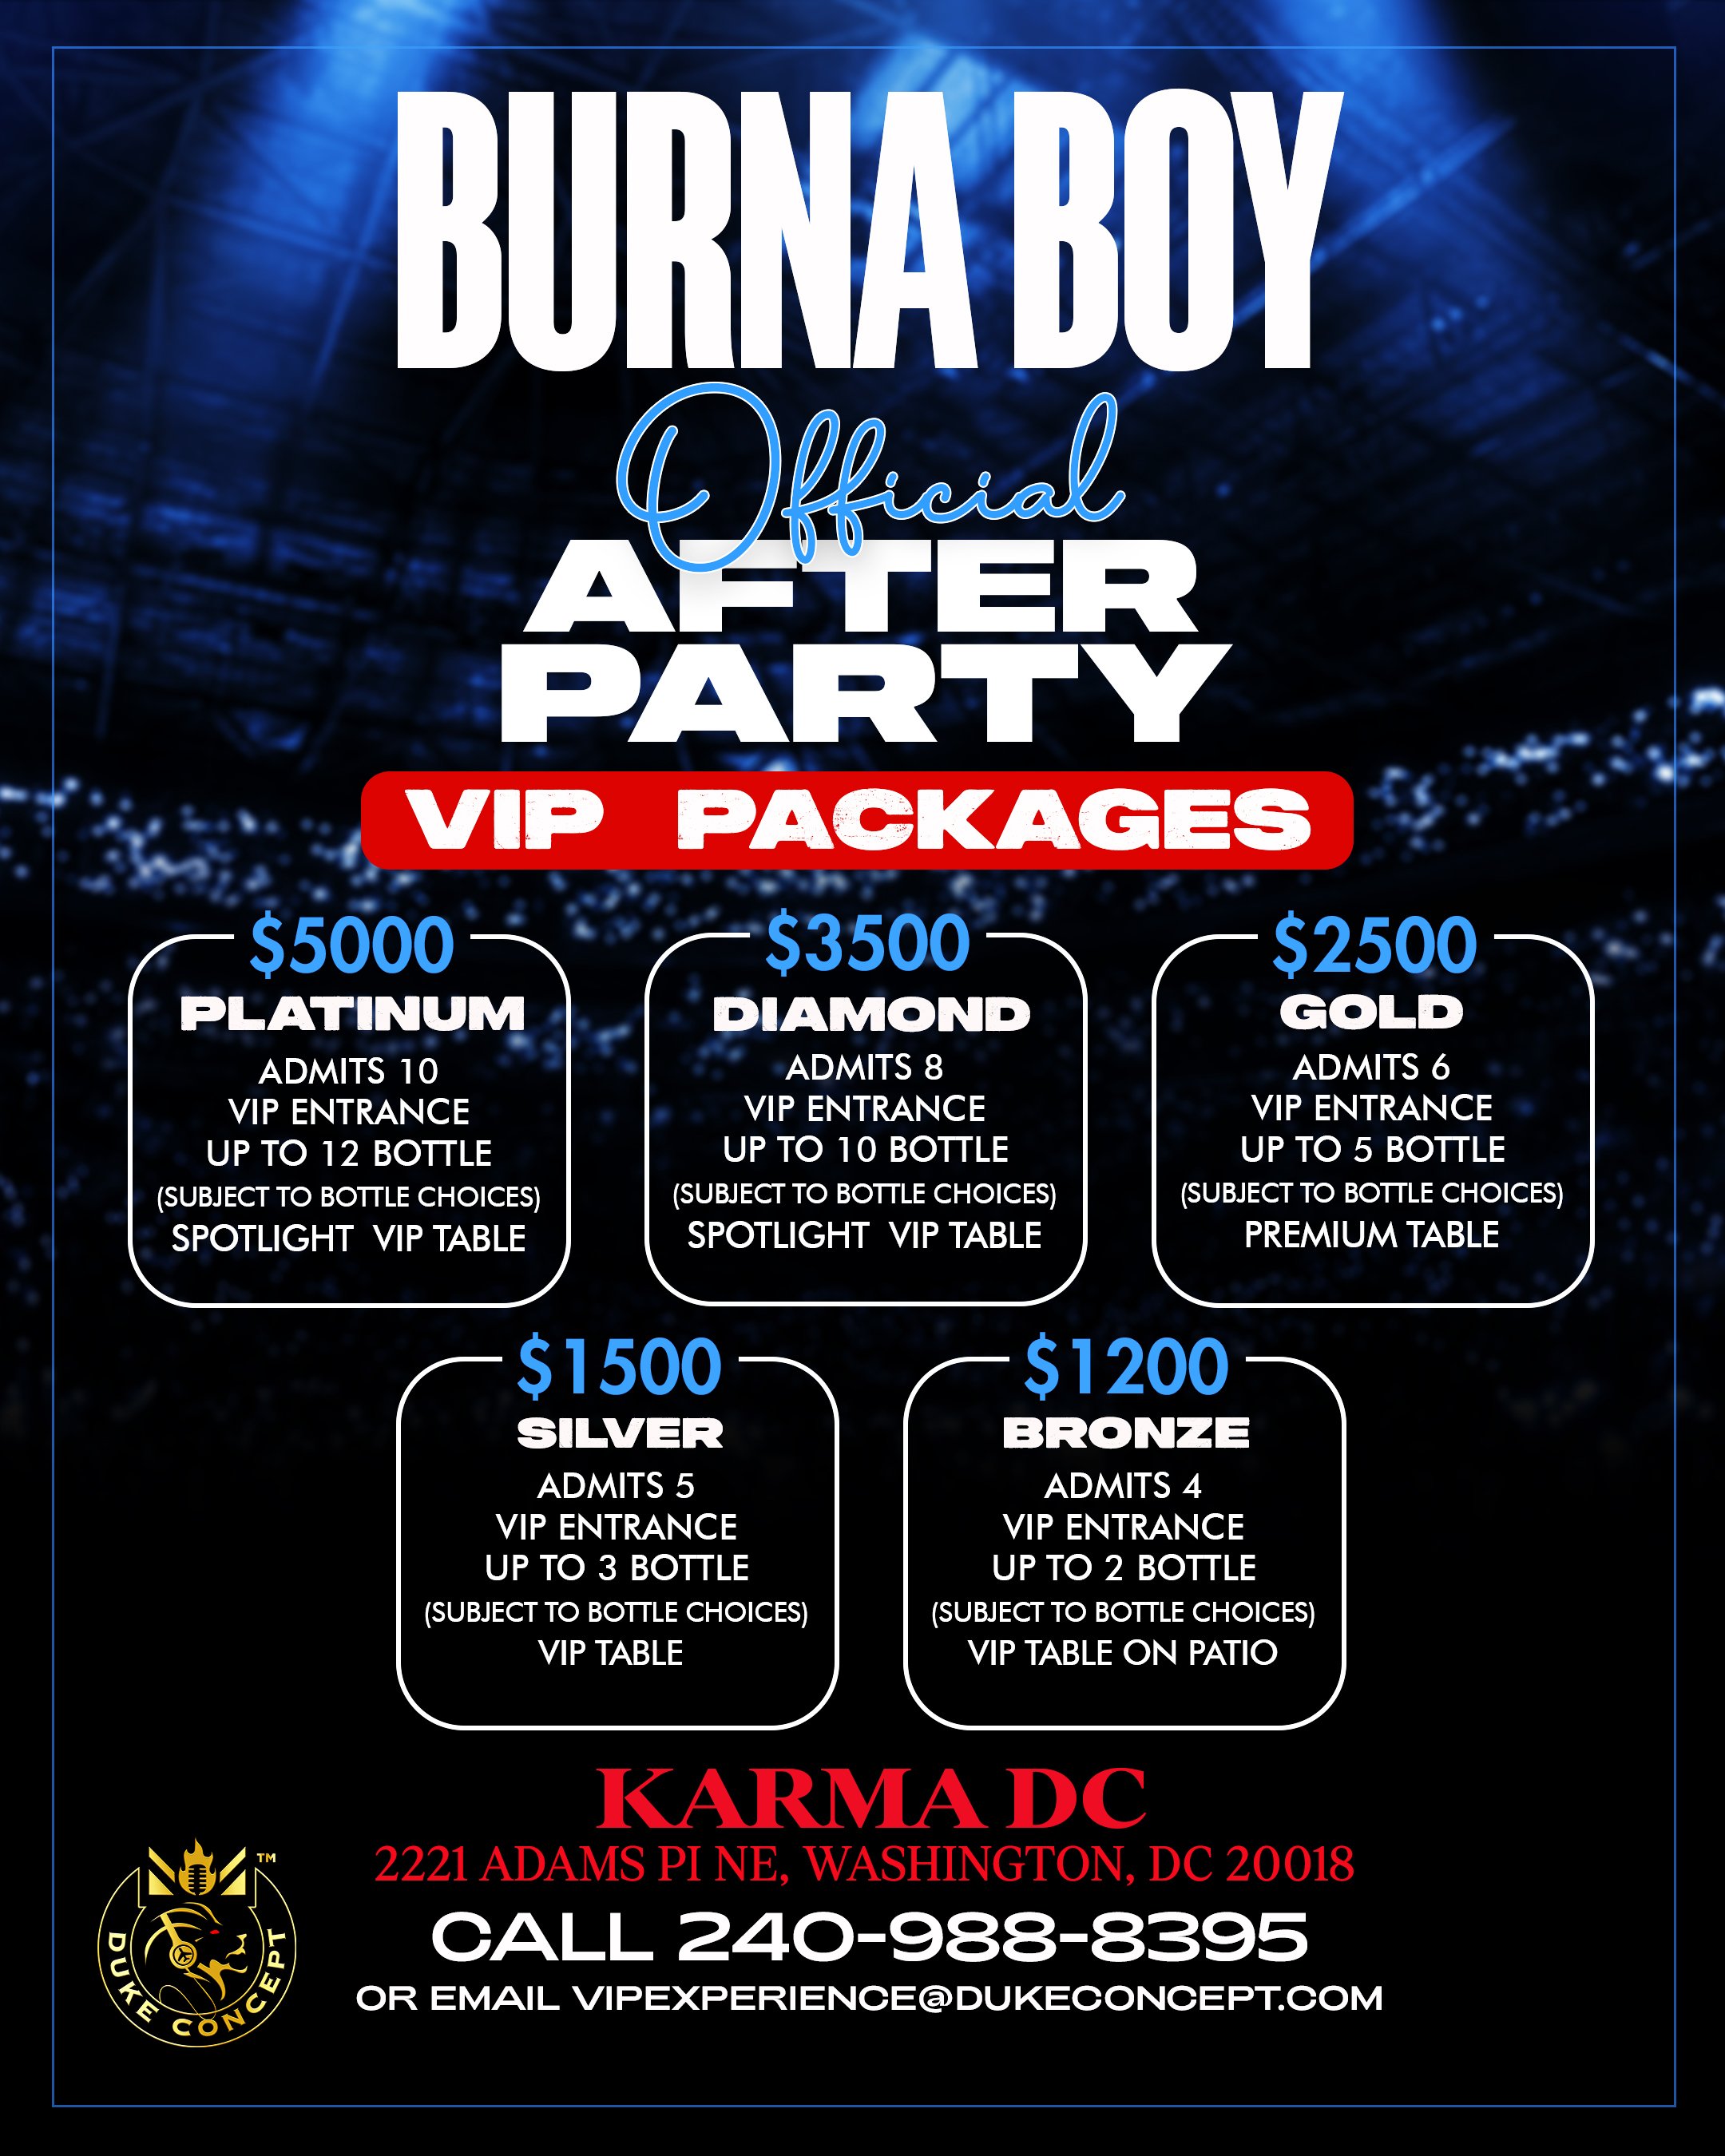 BurnaBoy dc after party with package.jpg